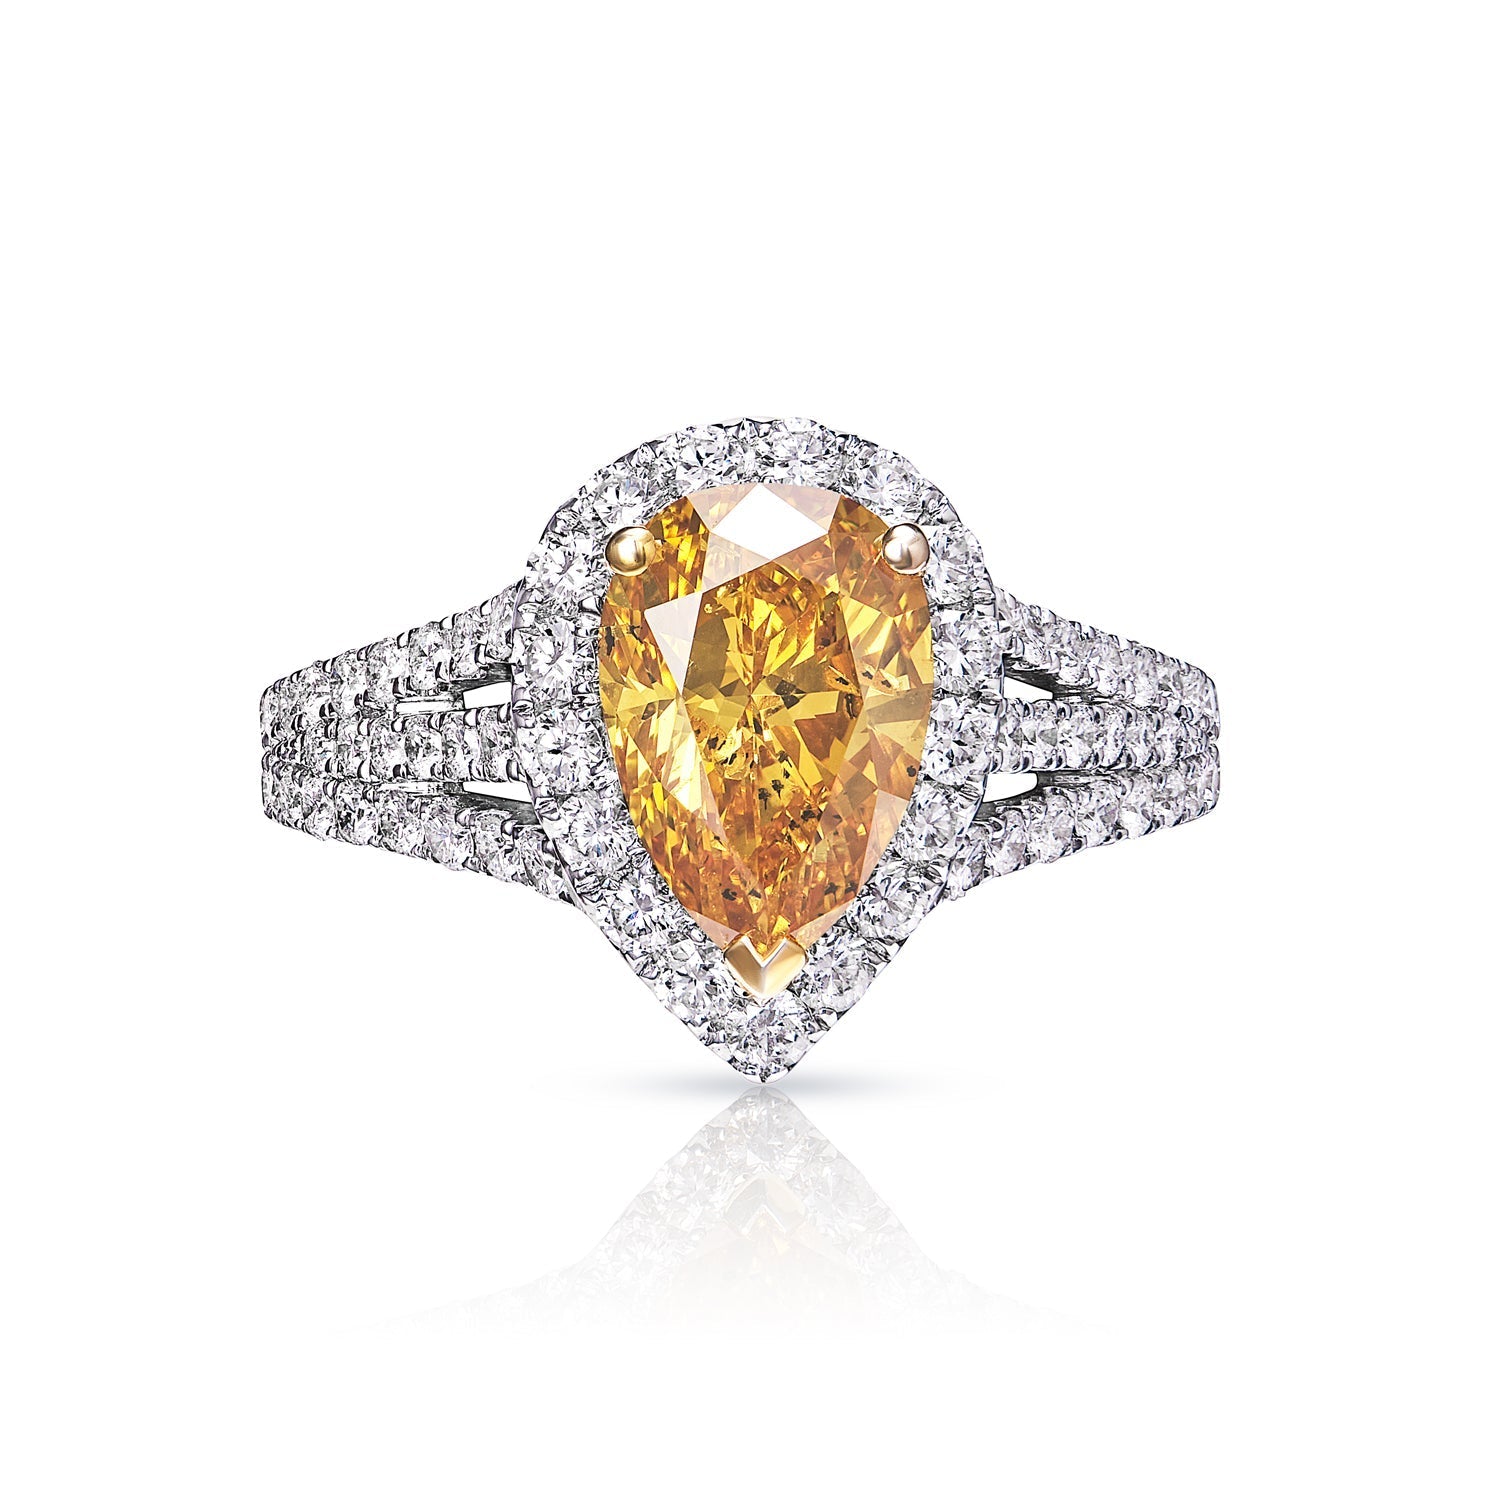 Valerie 3 Carat FVYO Pear Shape Diamond Engagement Ring Halo Front View